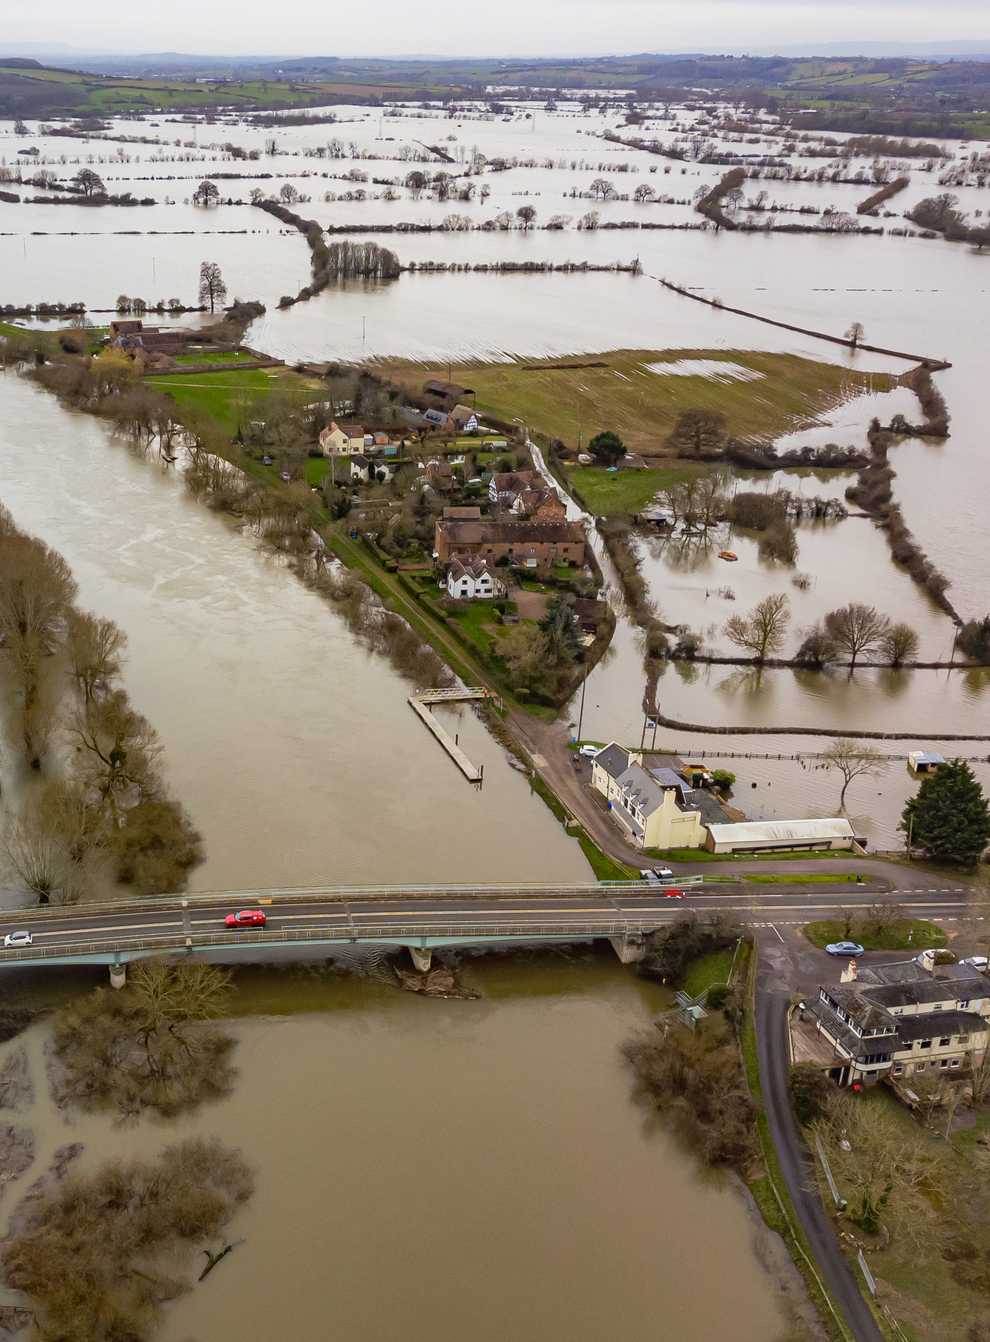 The number of people hit by heavy rain and river flooding and the costs of resulting damage could double if temperatures climb to 3C above pre-industrial levels, a report warns (Ben Birchall/PA)